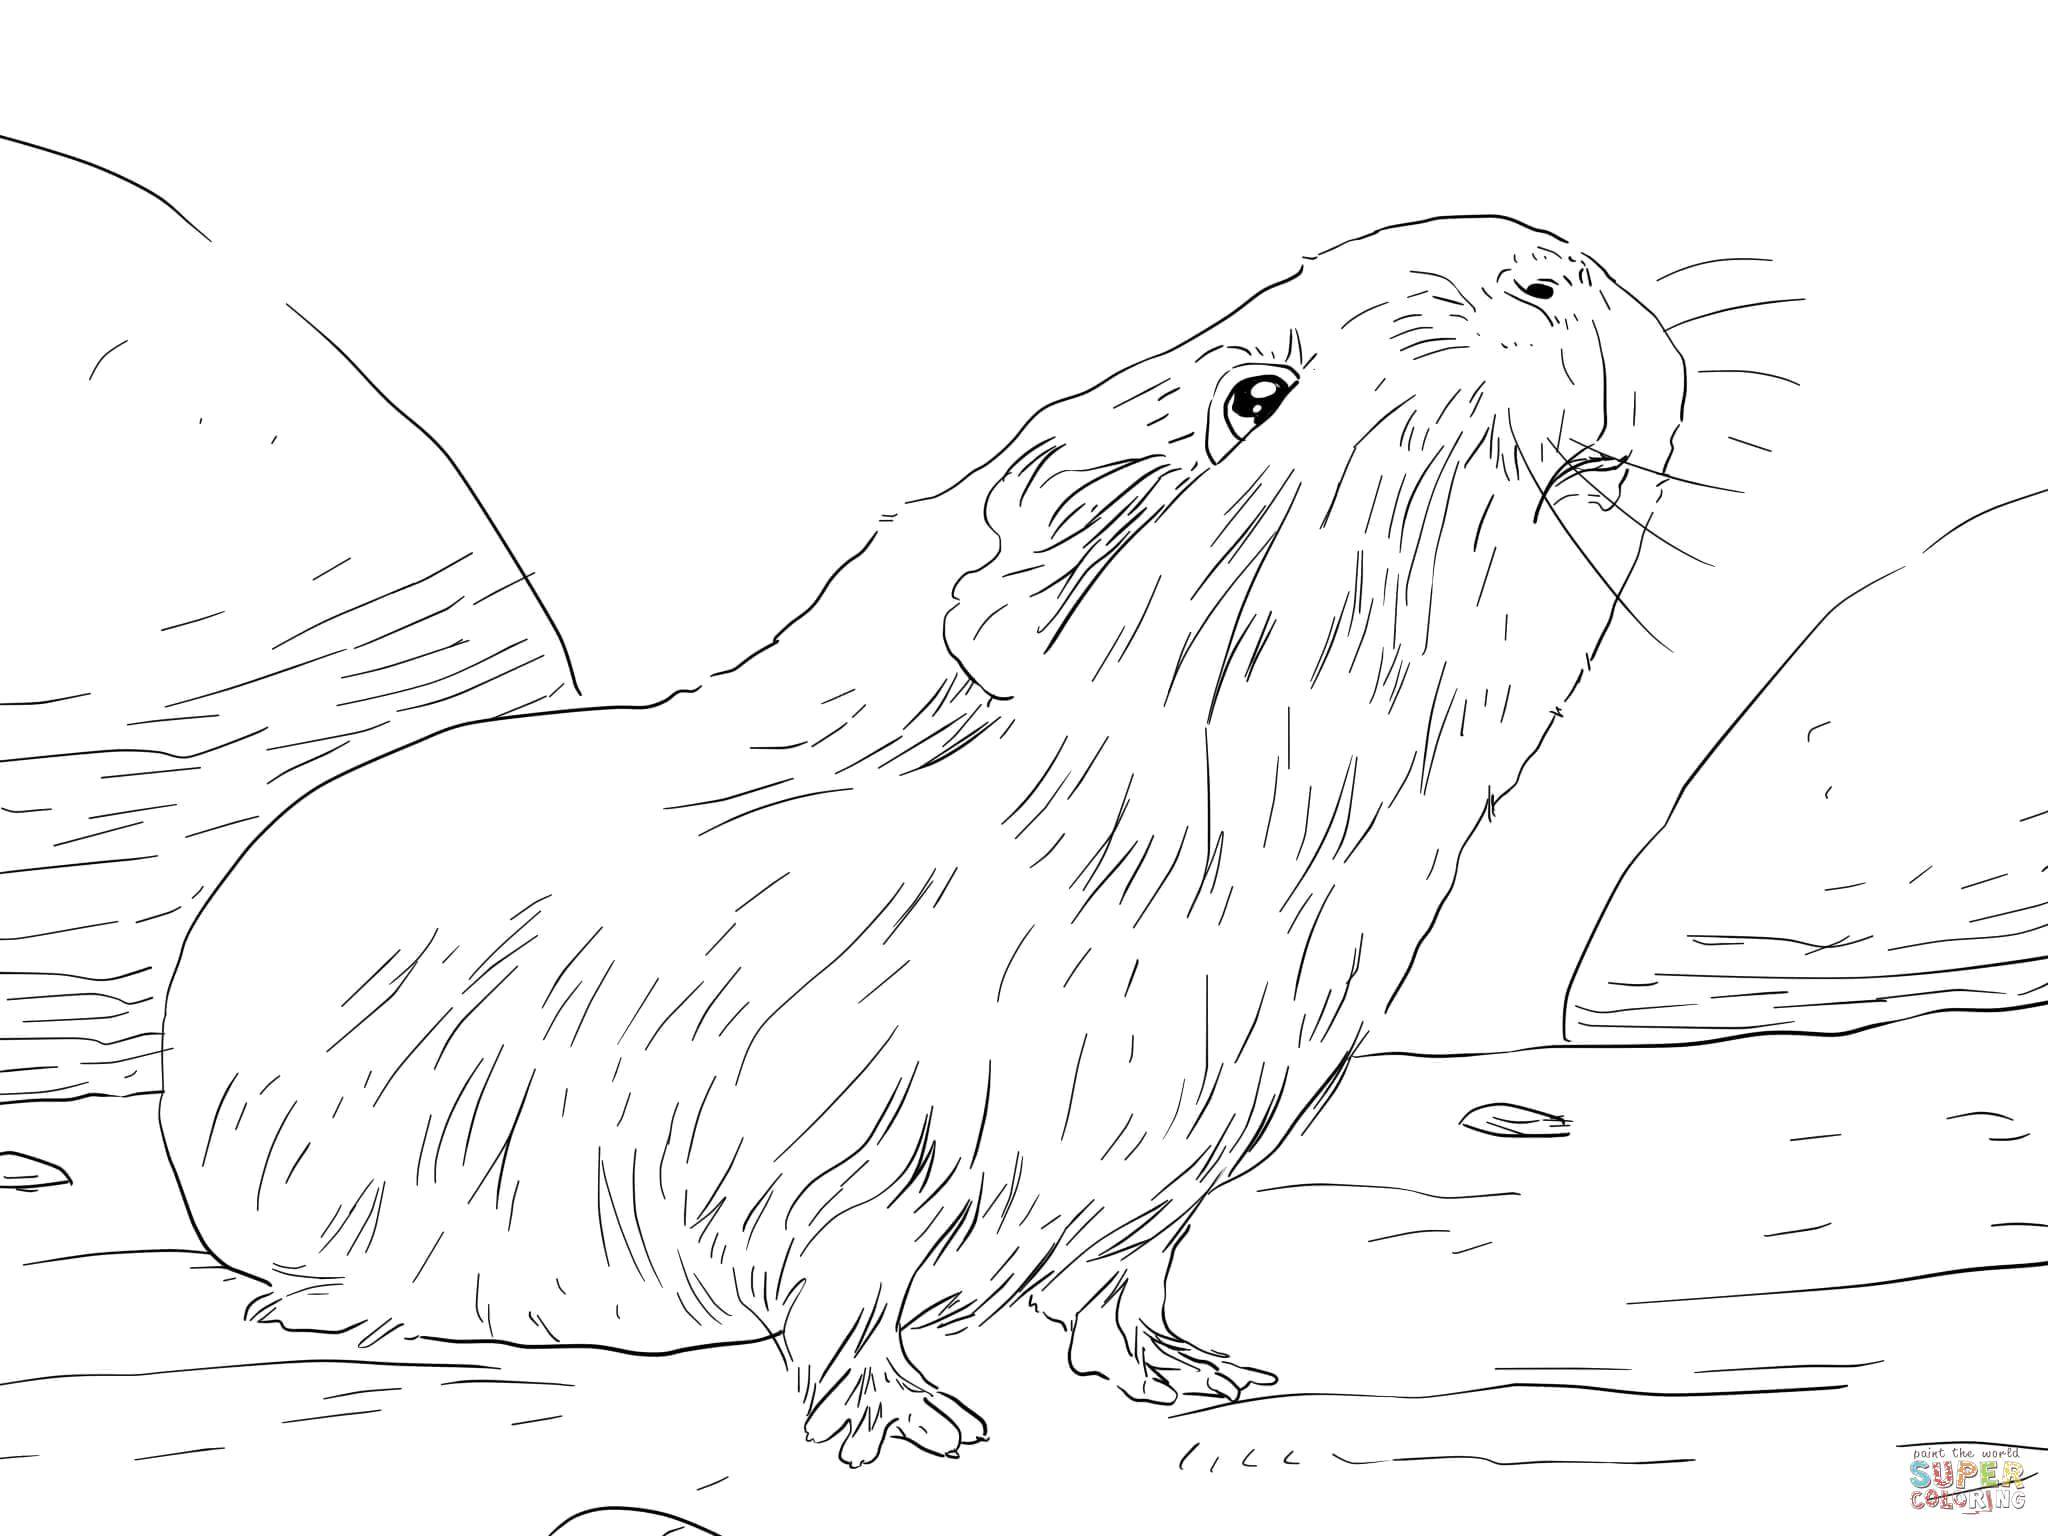 Capybara Coloring Page - Downloadable Rainforest Adventure Kits For ...